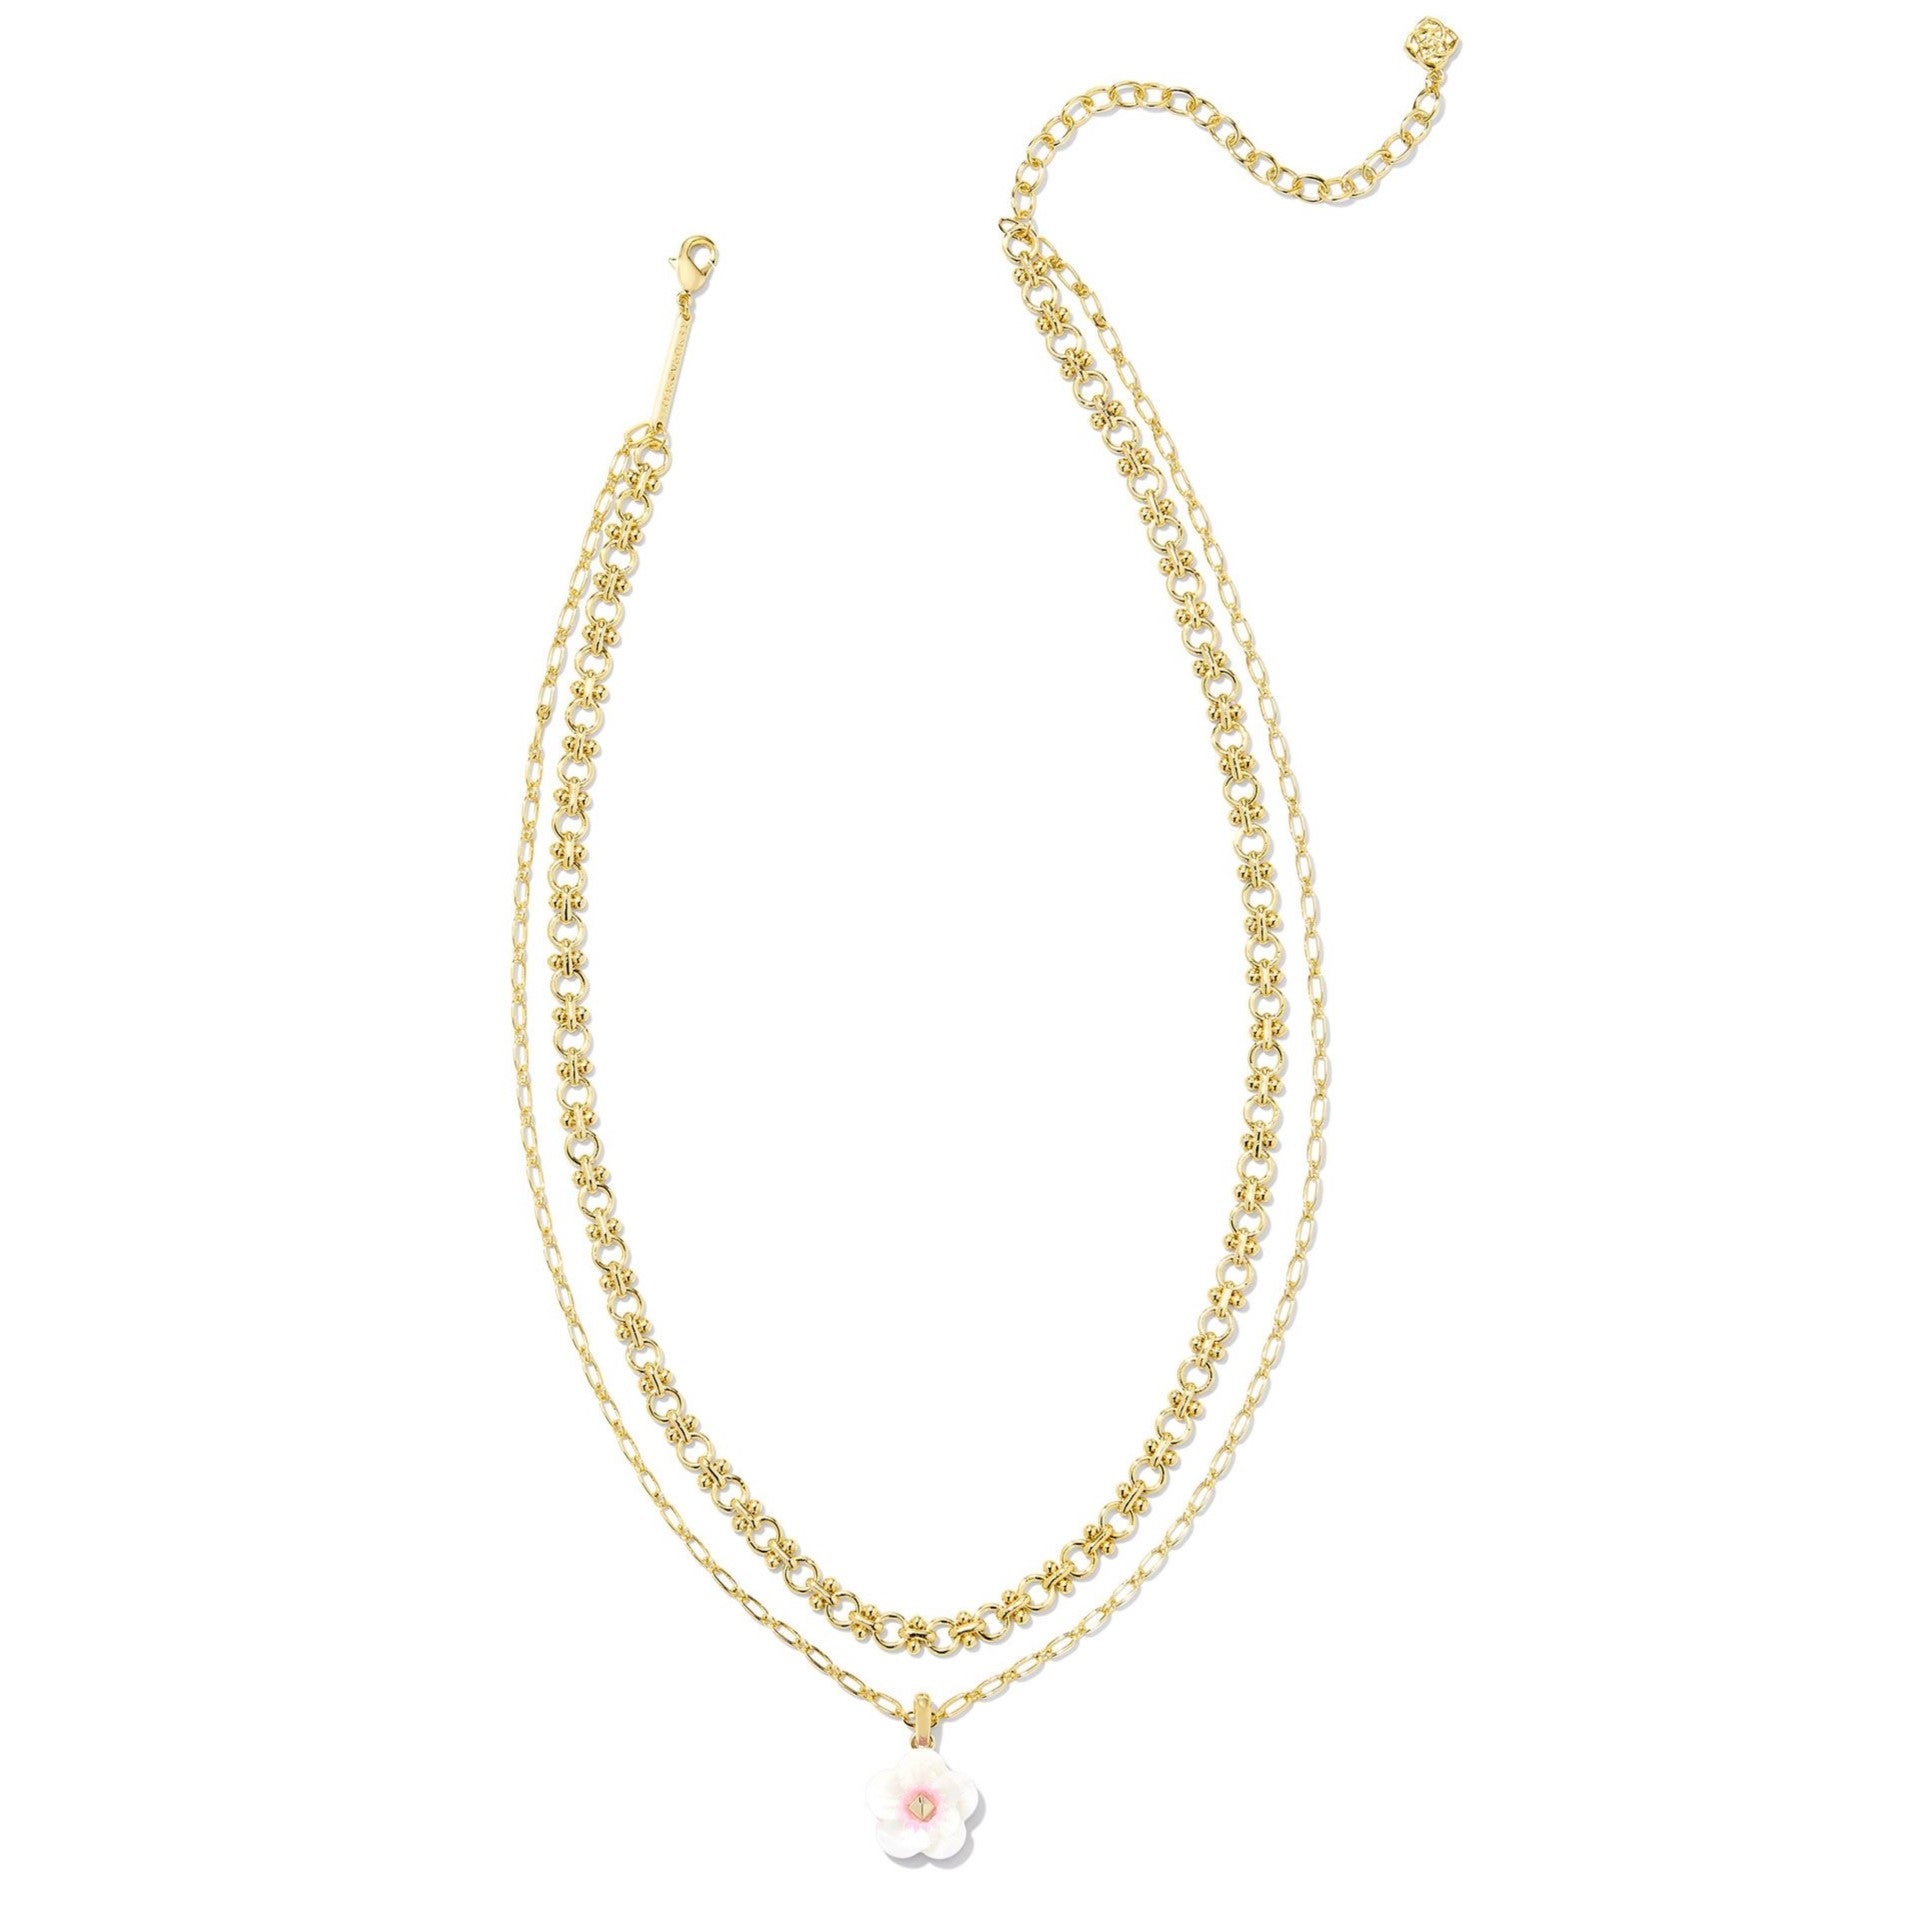 Kendra Scott | Deliah Gold Multi Strand Necklace in Iridescent Pink and White Mix - Giddy Up Glamour Boutique